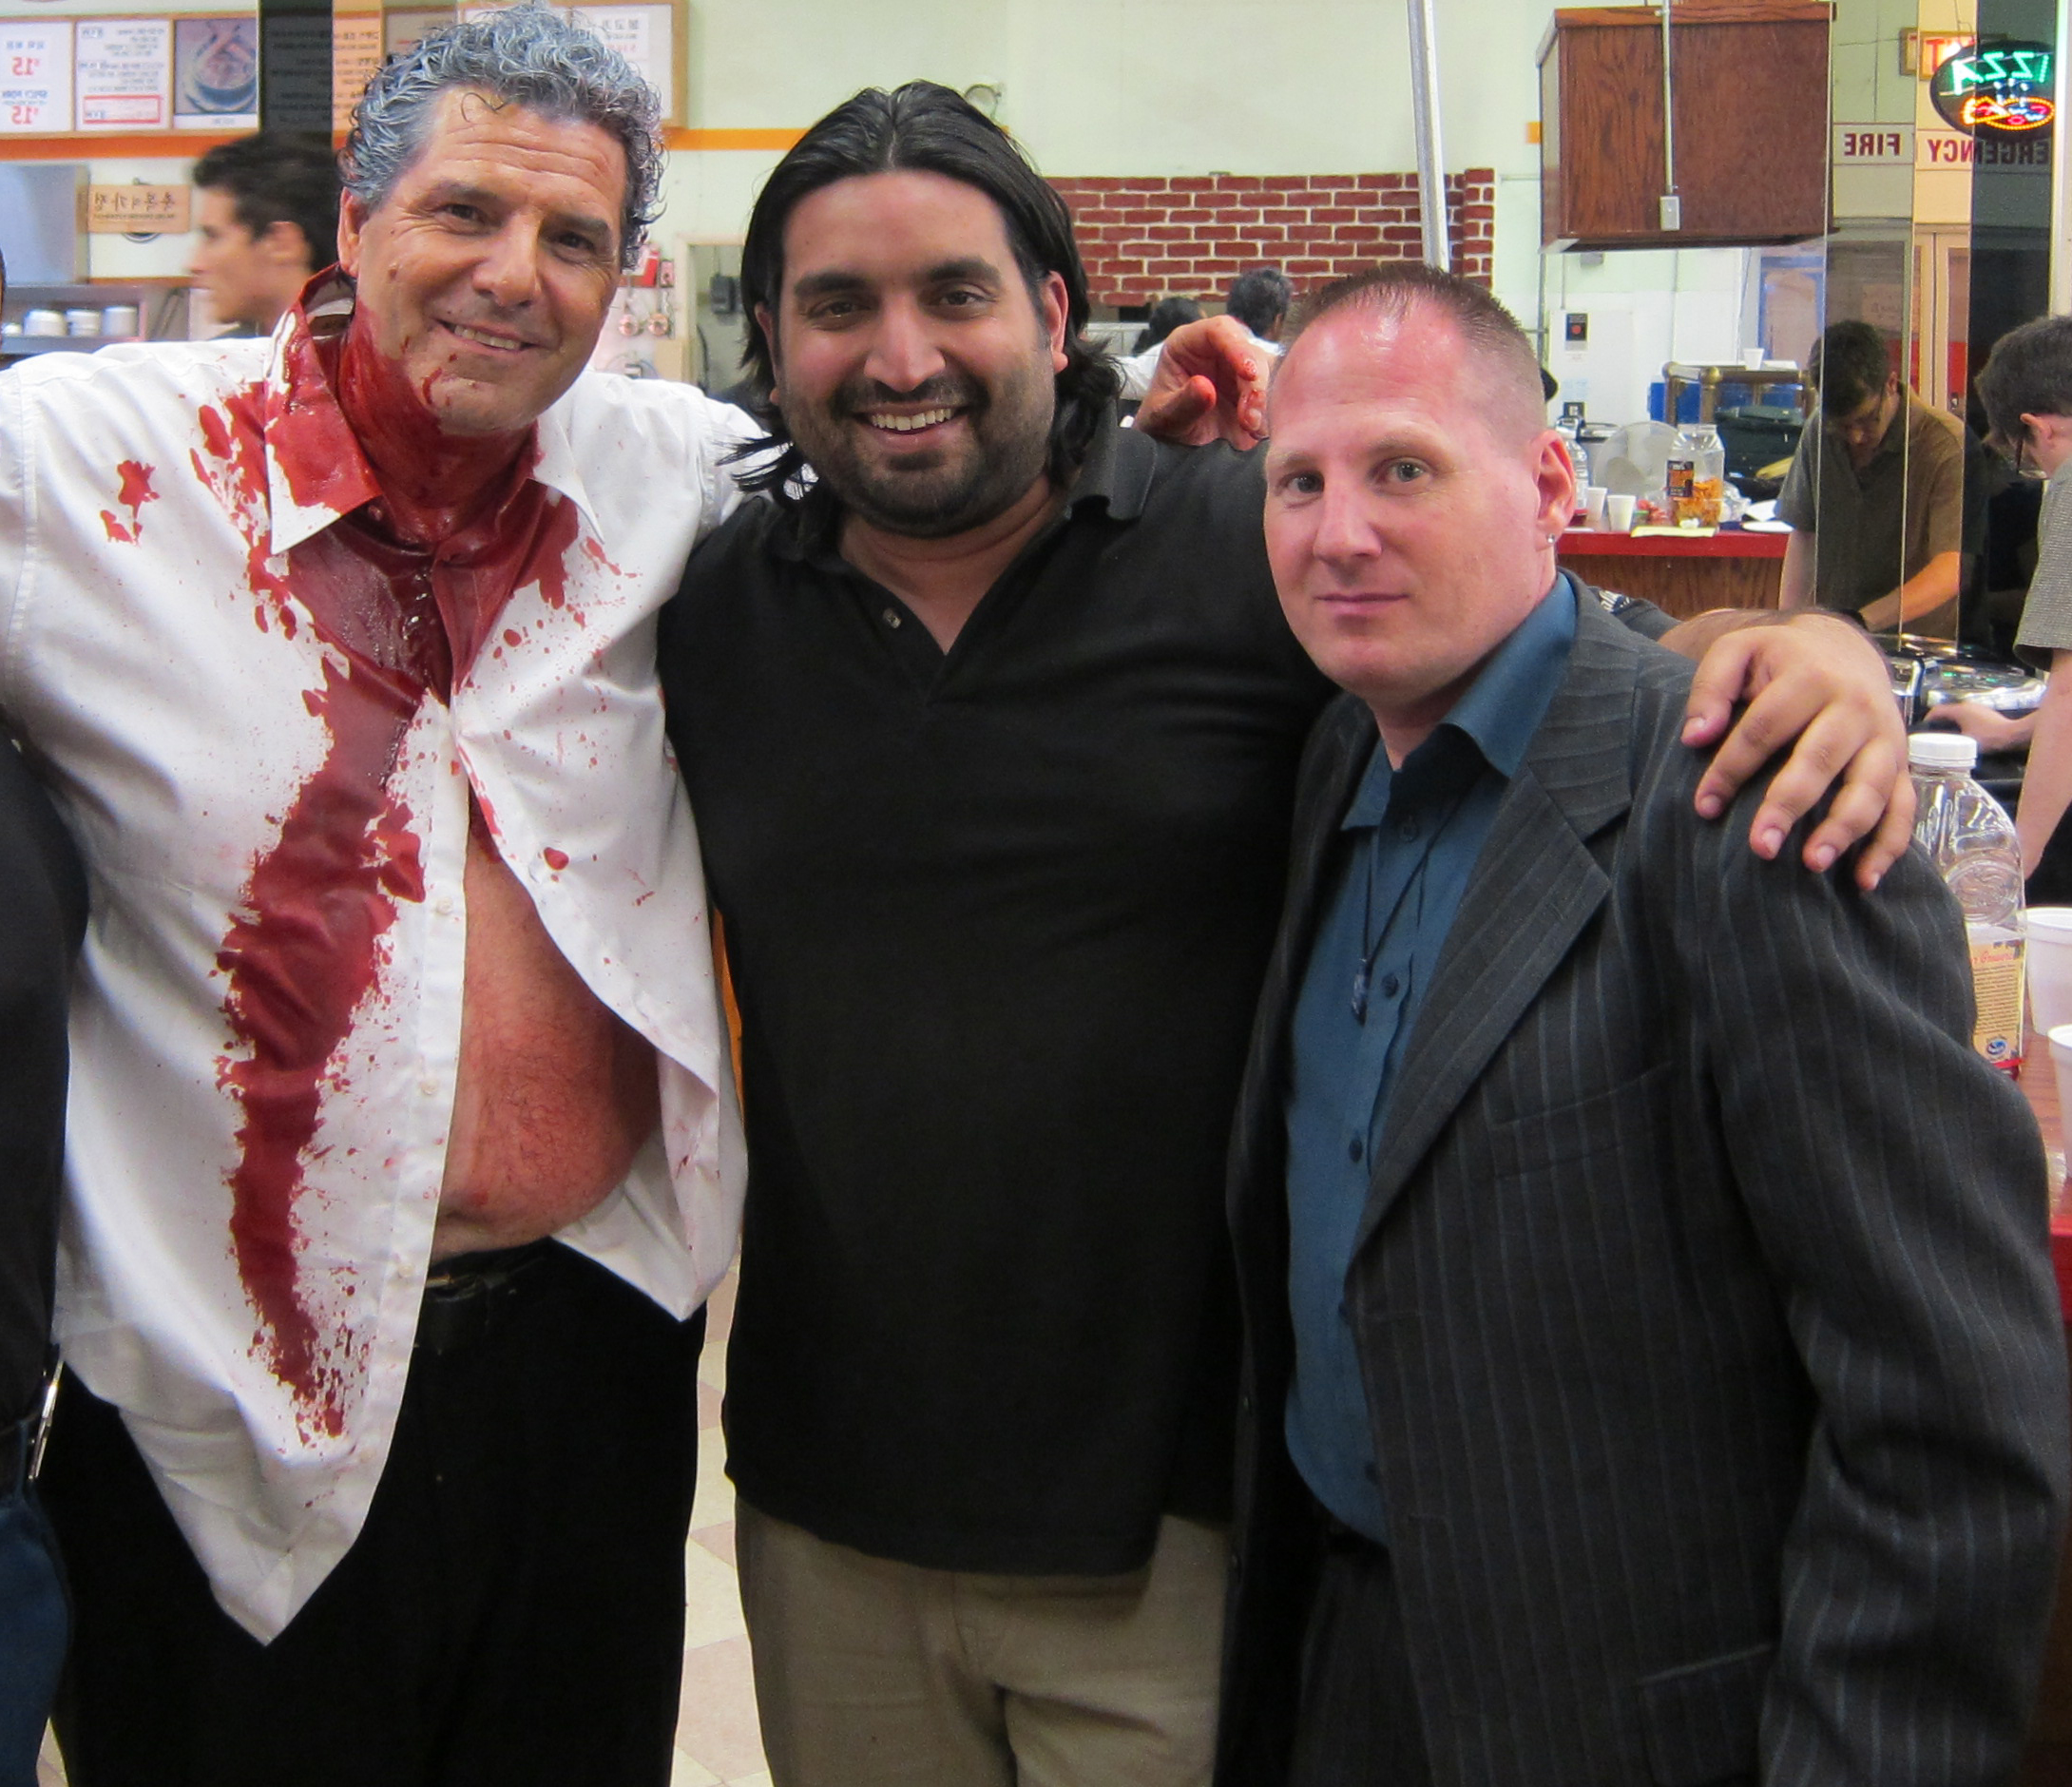 Rich Rossi (He's Way More Famous Than You, Knuckleheads), John Thomas (NYC casting director) and Ronnie Banerjee on the set of Night Bird